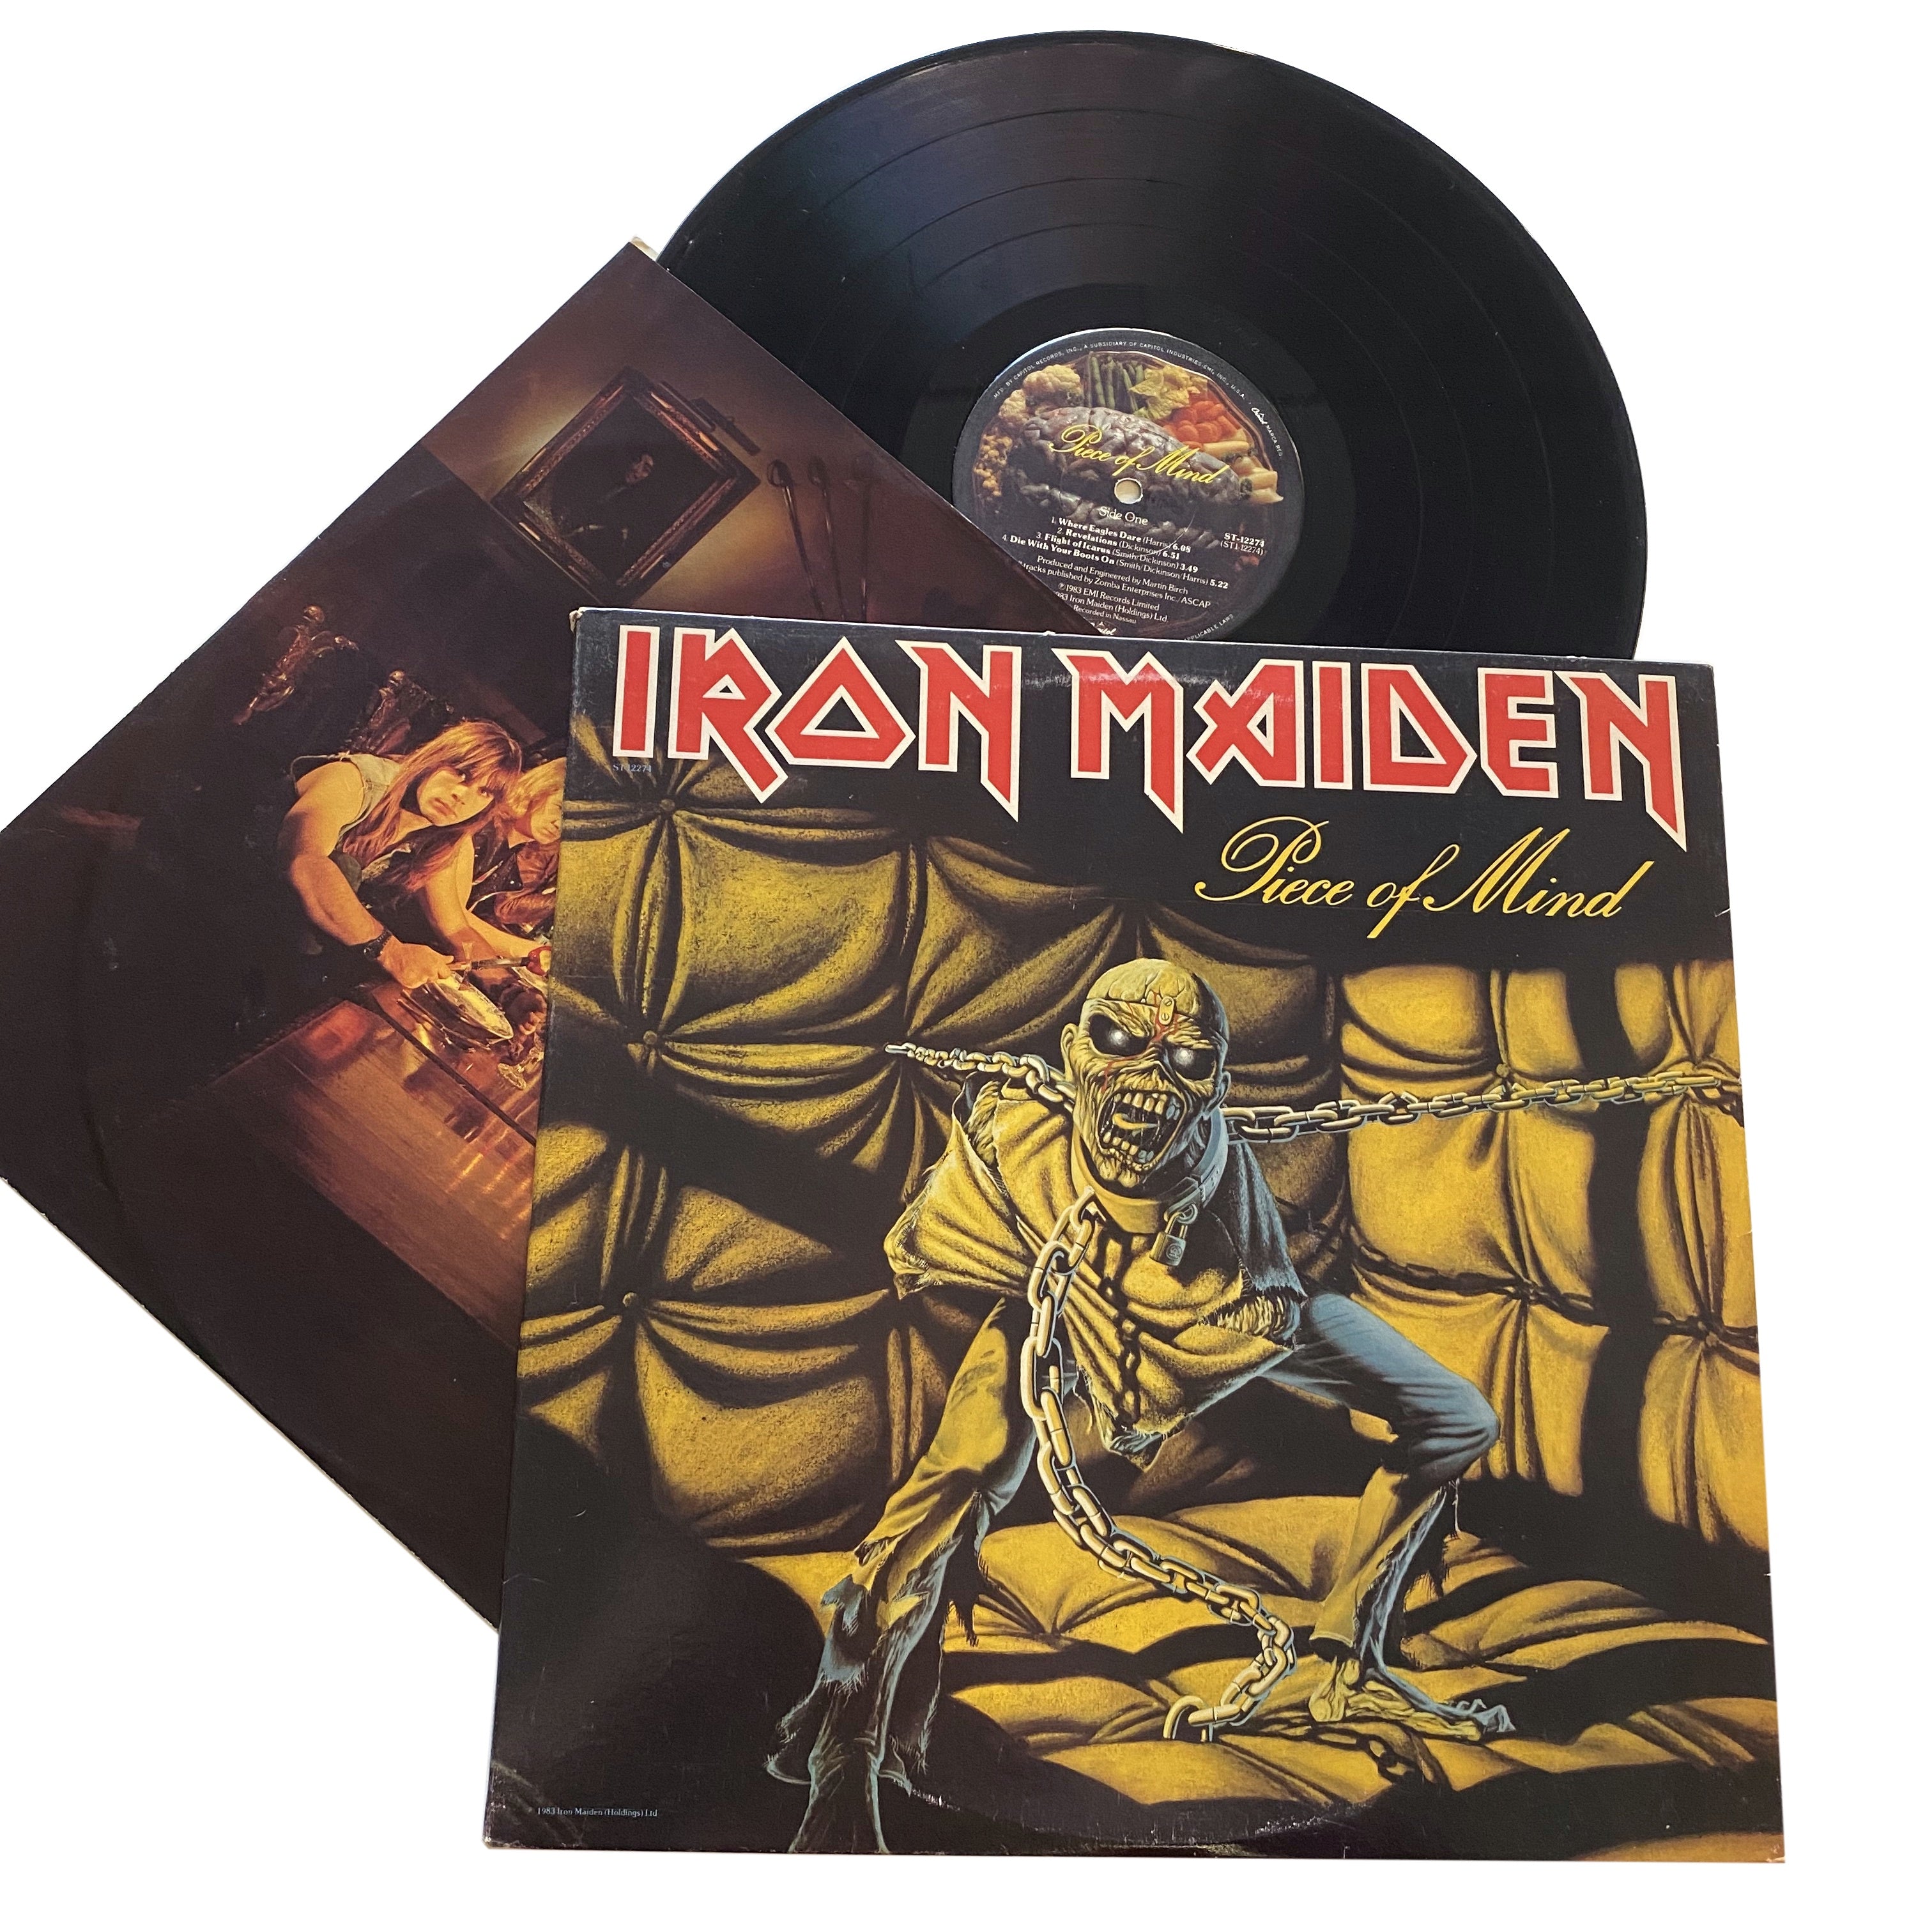 Iron Maiden: S/T 12 – Sorry State Records